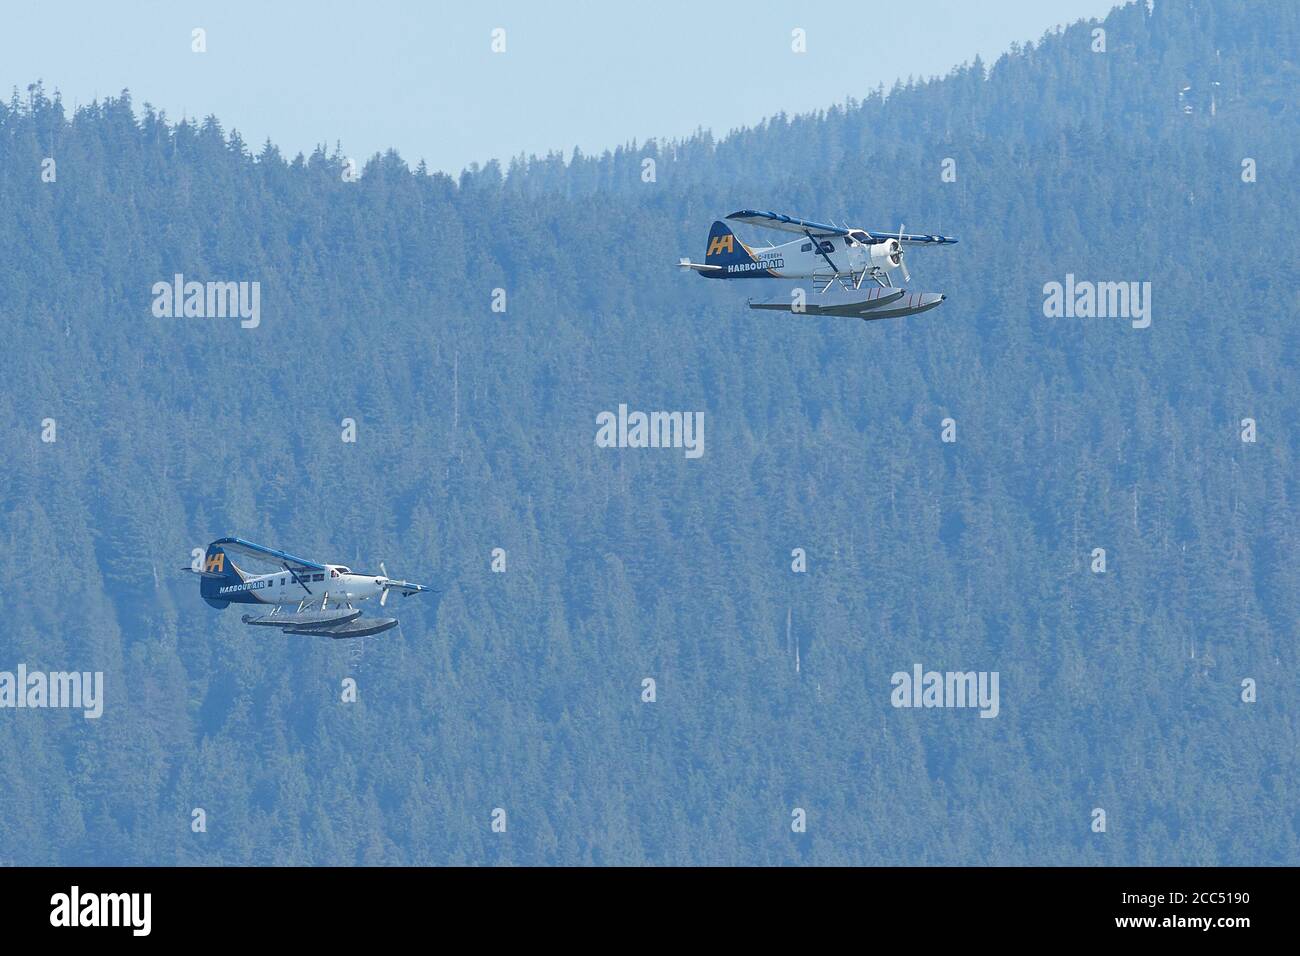 Harbour Air DHC-2 Beaver Floatplane Together With A Harbour Air DHC-3-T Turbo Otter Floatplane Flying Over Mountainous Terrain In Canada. Stock Photo